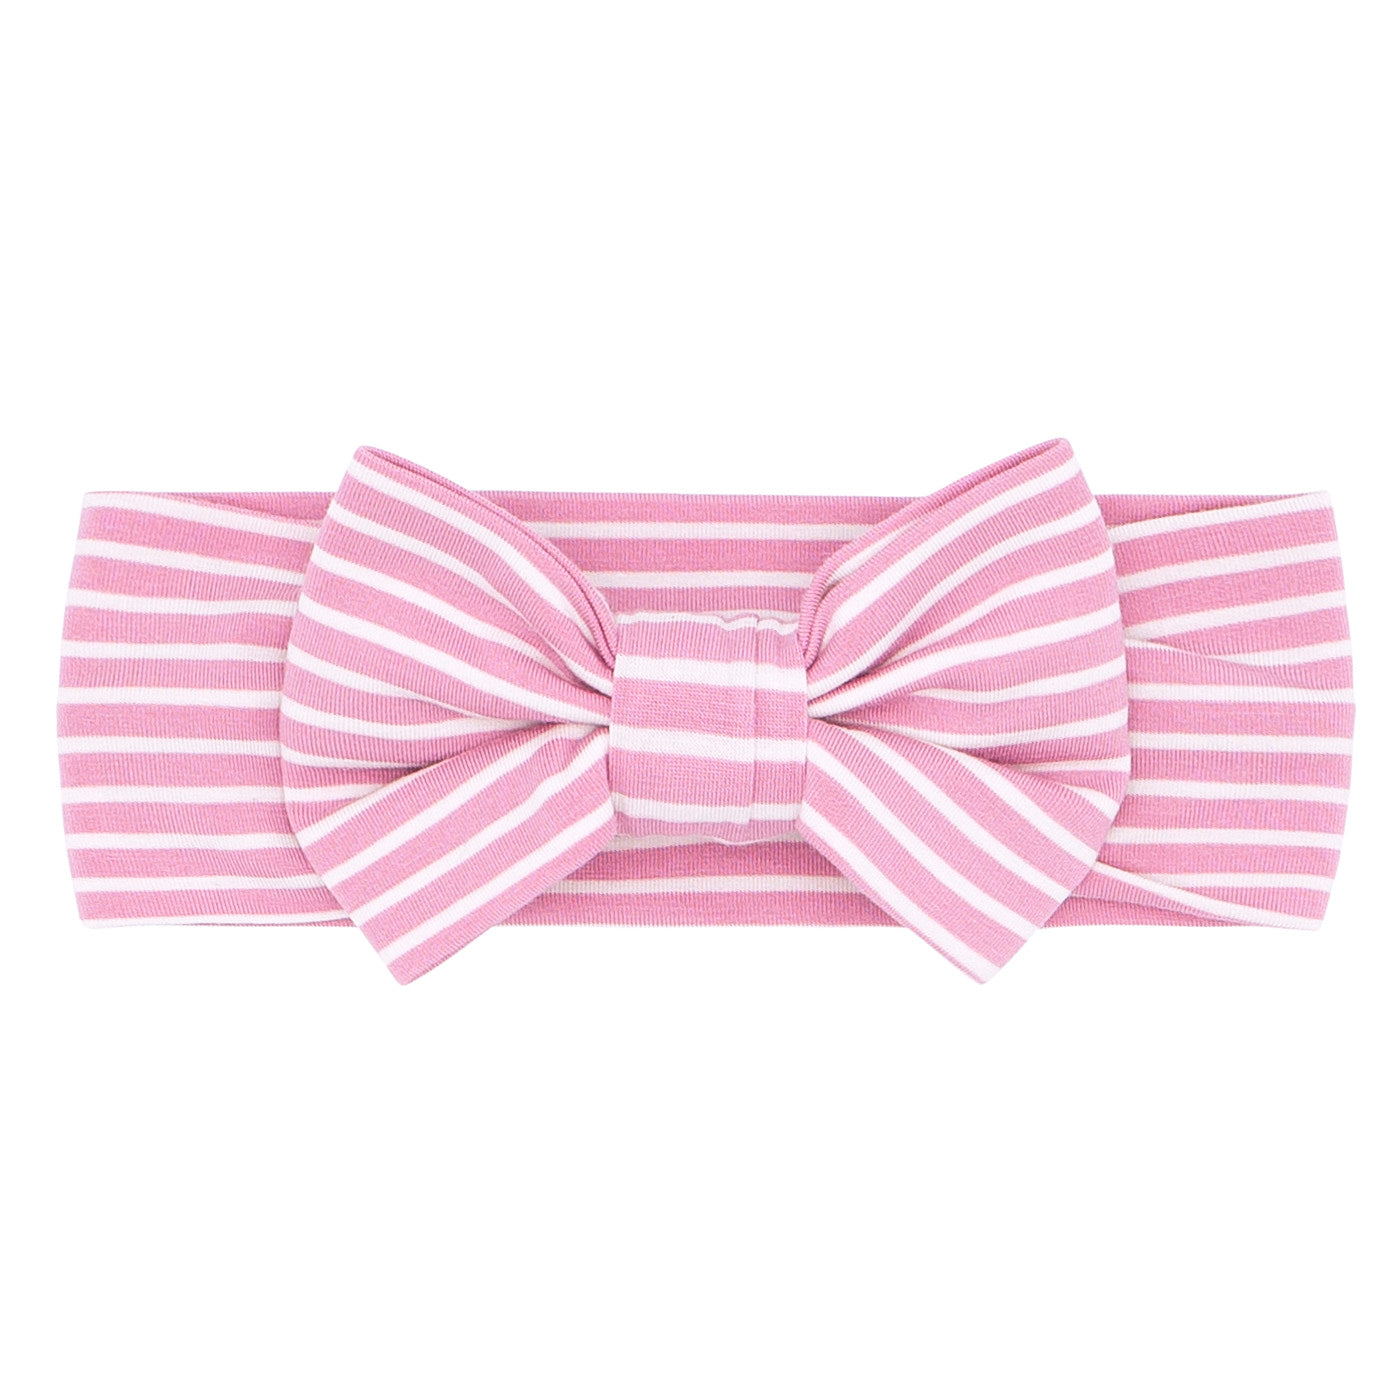 Flat lay image of a Garden Rose Stripe luxe bow headband in size newborn to age four